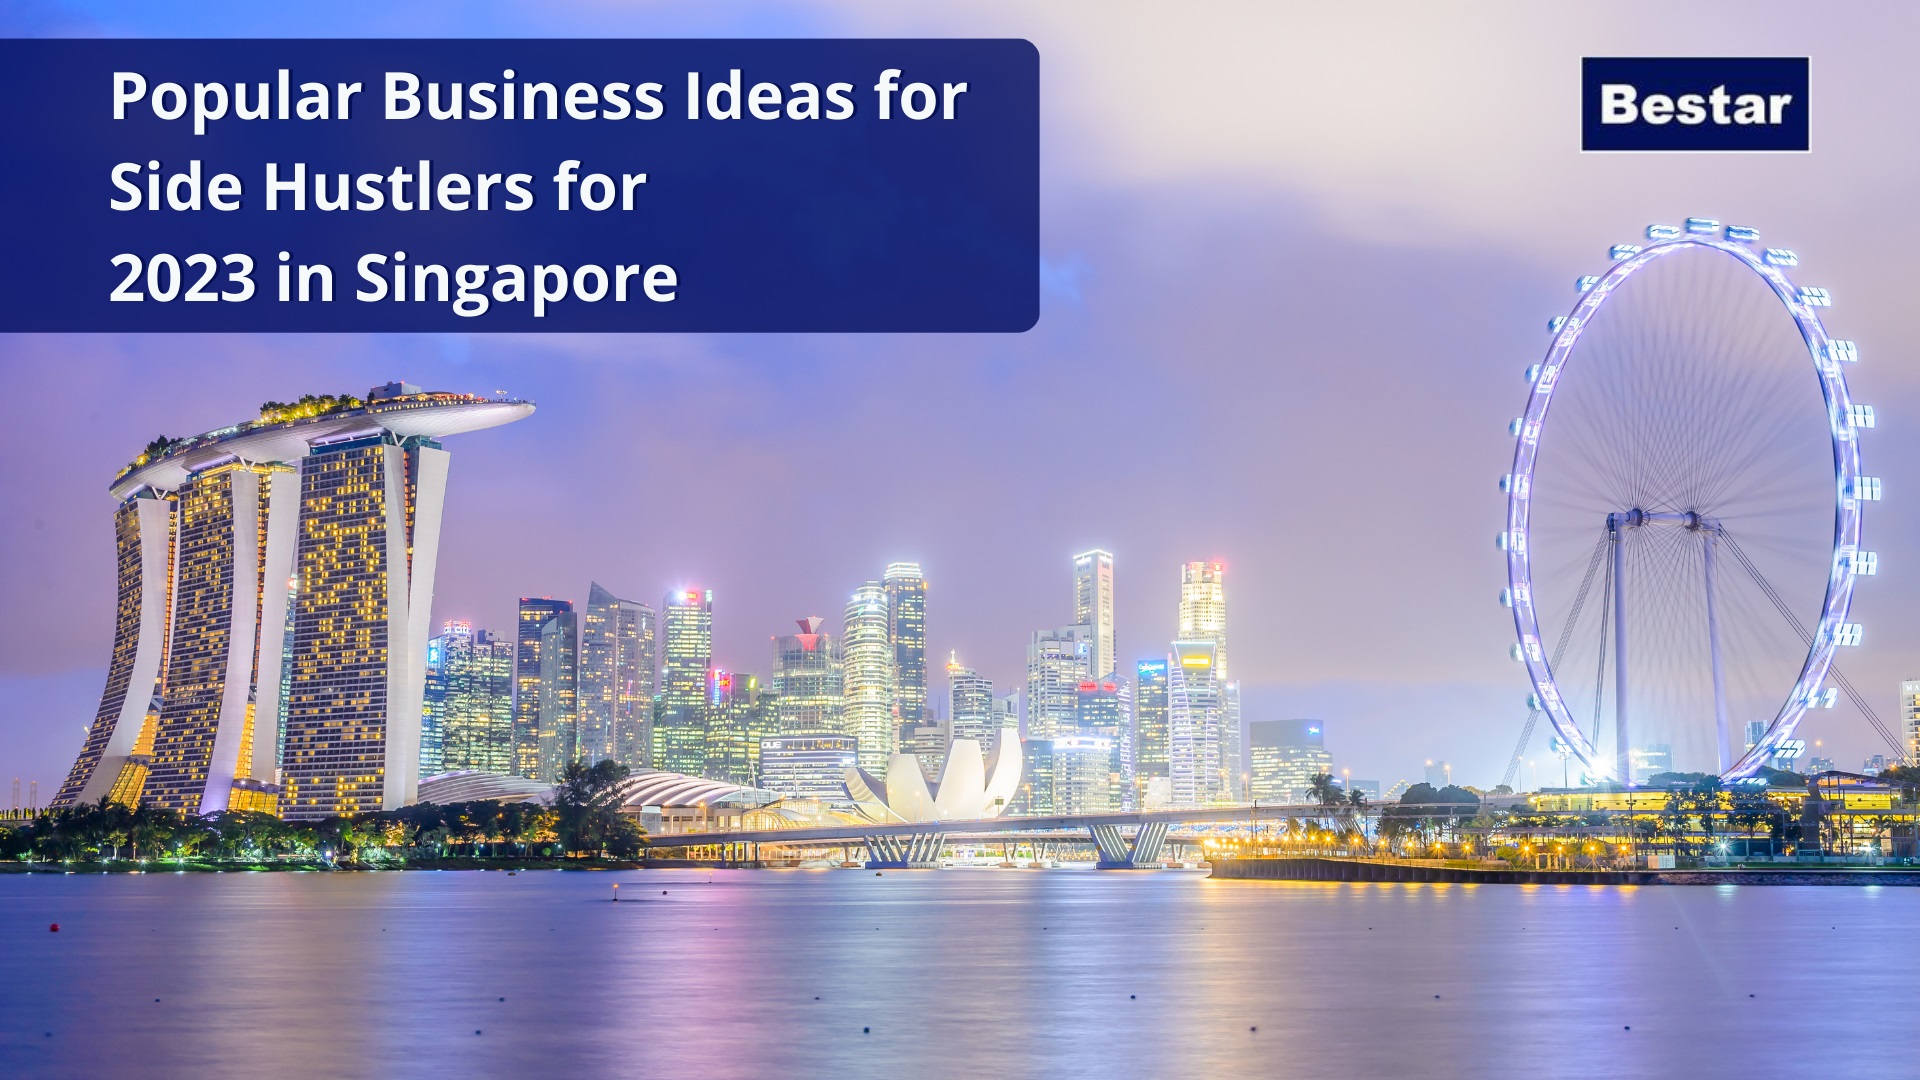 Popular Business Ideas for Side Hustlers for 2023 in Singapore